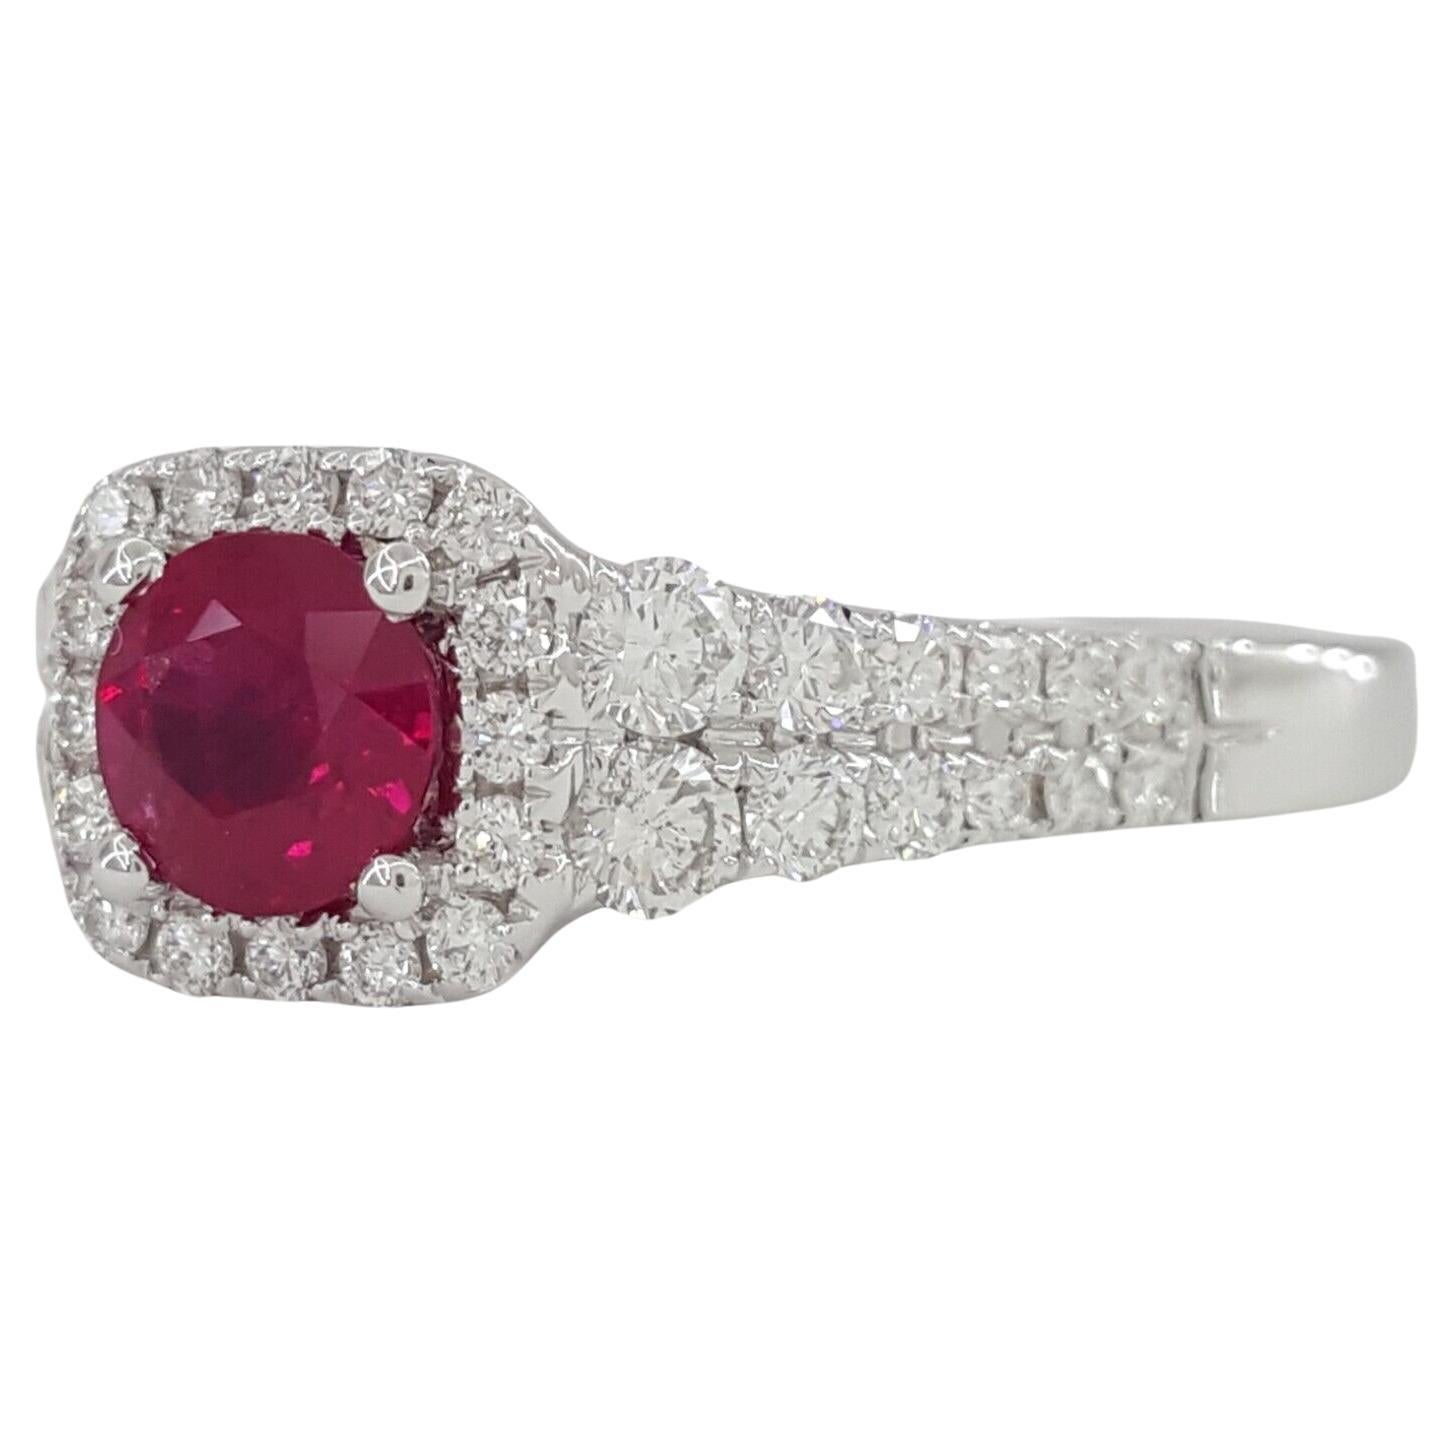 Round Cut Ruby & Round Brilliant Cut Diamond Halo Engagement Ring 14kk White Gold.  
The ring weighs 4.5 grams, size 7, the center is a Natural Round Cut Natural Red Burma Ruby weighing ~0.55 ct.
There are 40 Natural Round Brilliant Cut Diamonds